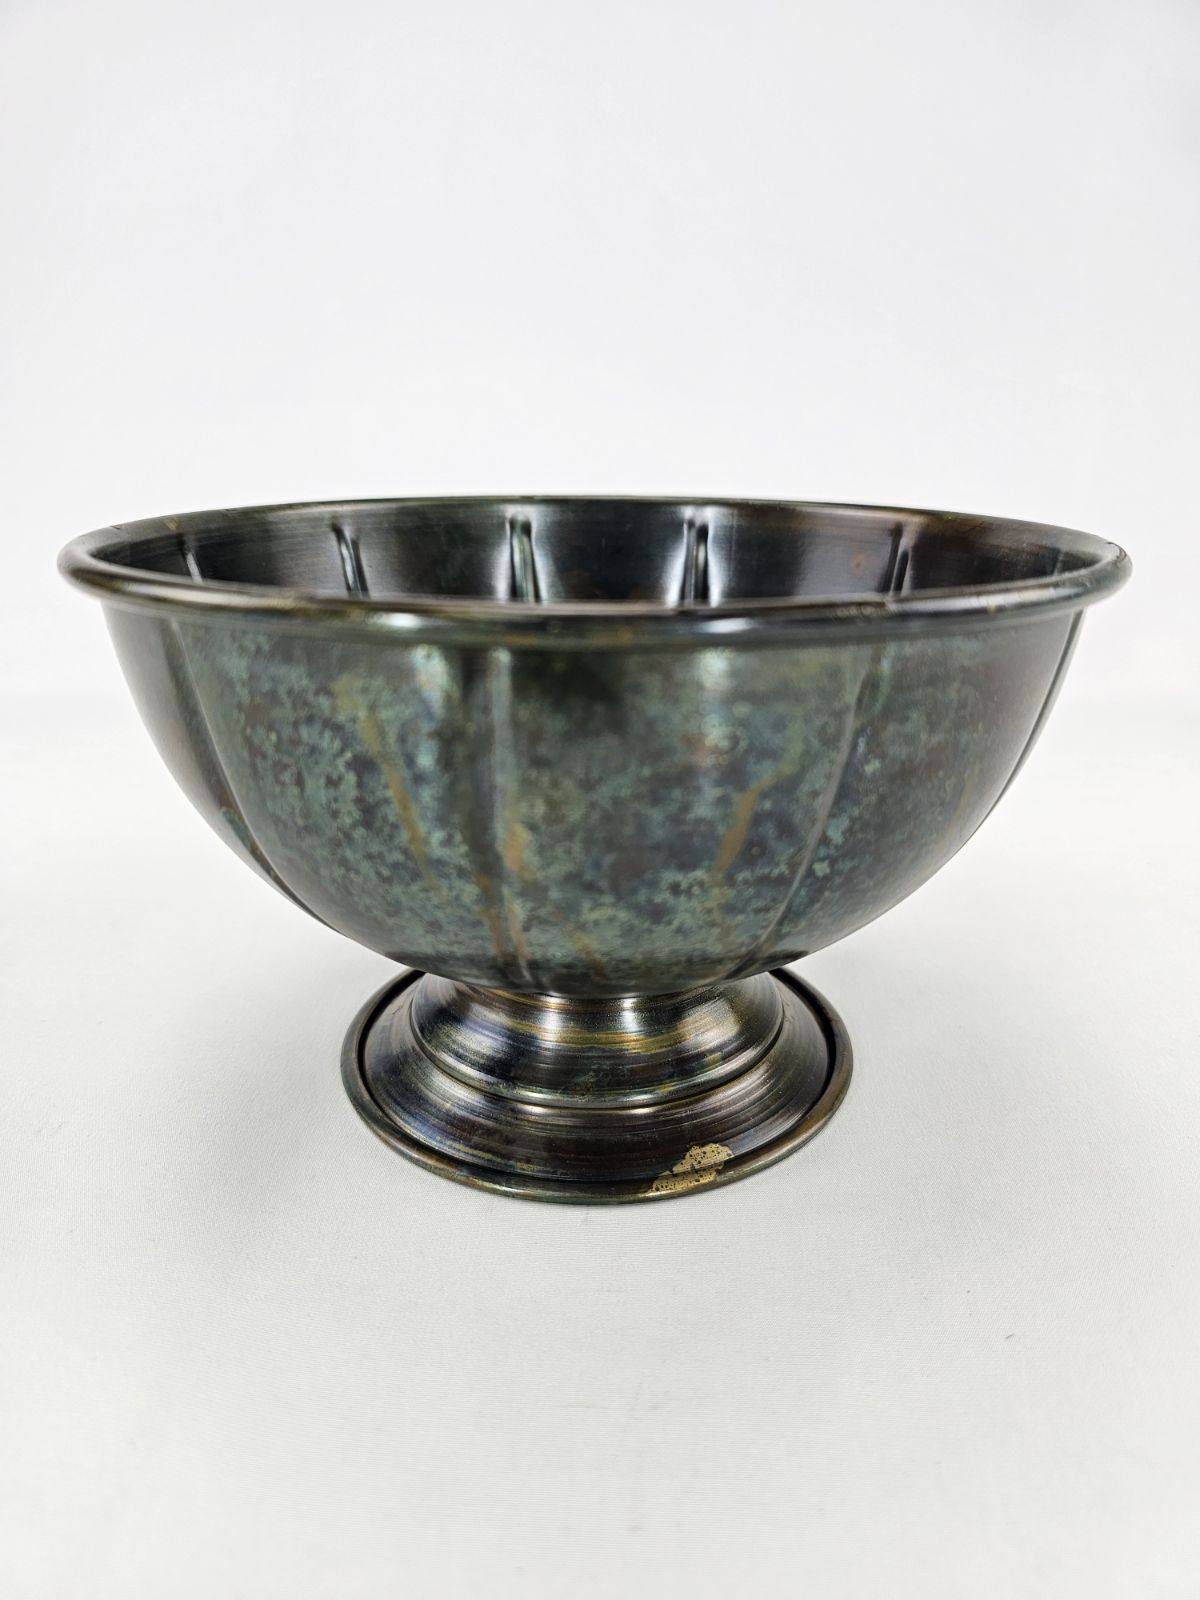 Metal compote container for floral designs - medium size - patina - Greenery MarketVasesKE258234